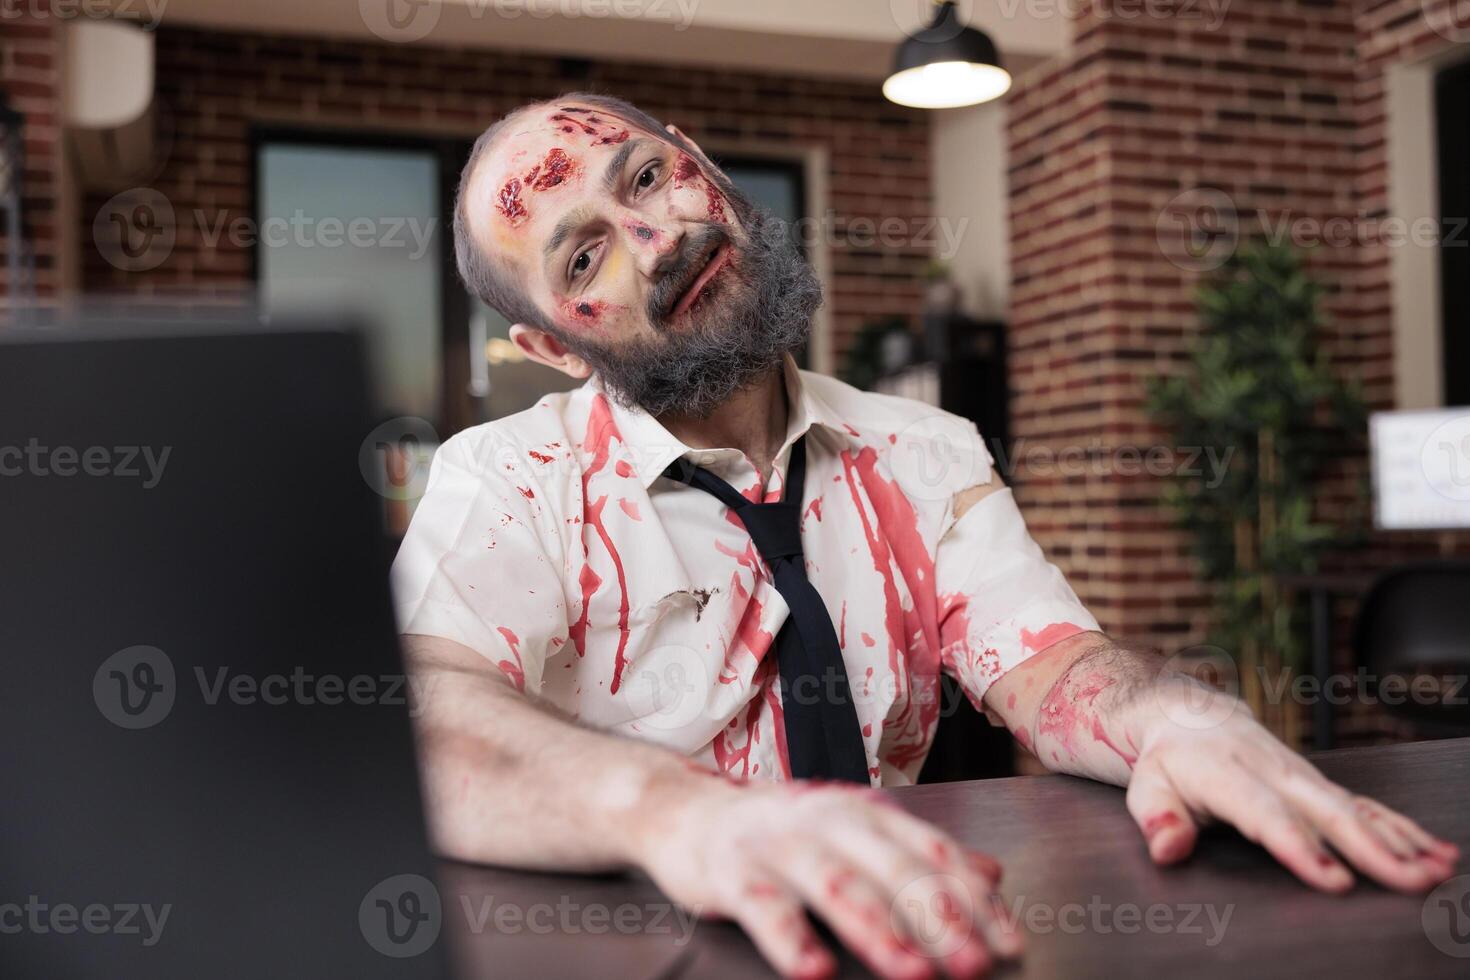 Portrait of overworked man with drowsy expression, limping on office desk chair, looking like zombie. Businessman covered in blood, looking exhausted after working too much, exploited by capitalism photo